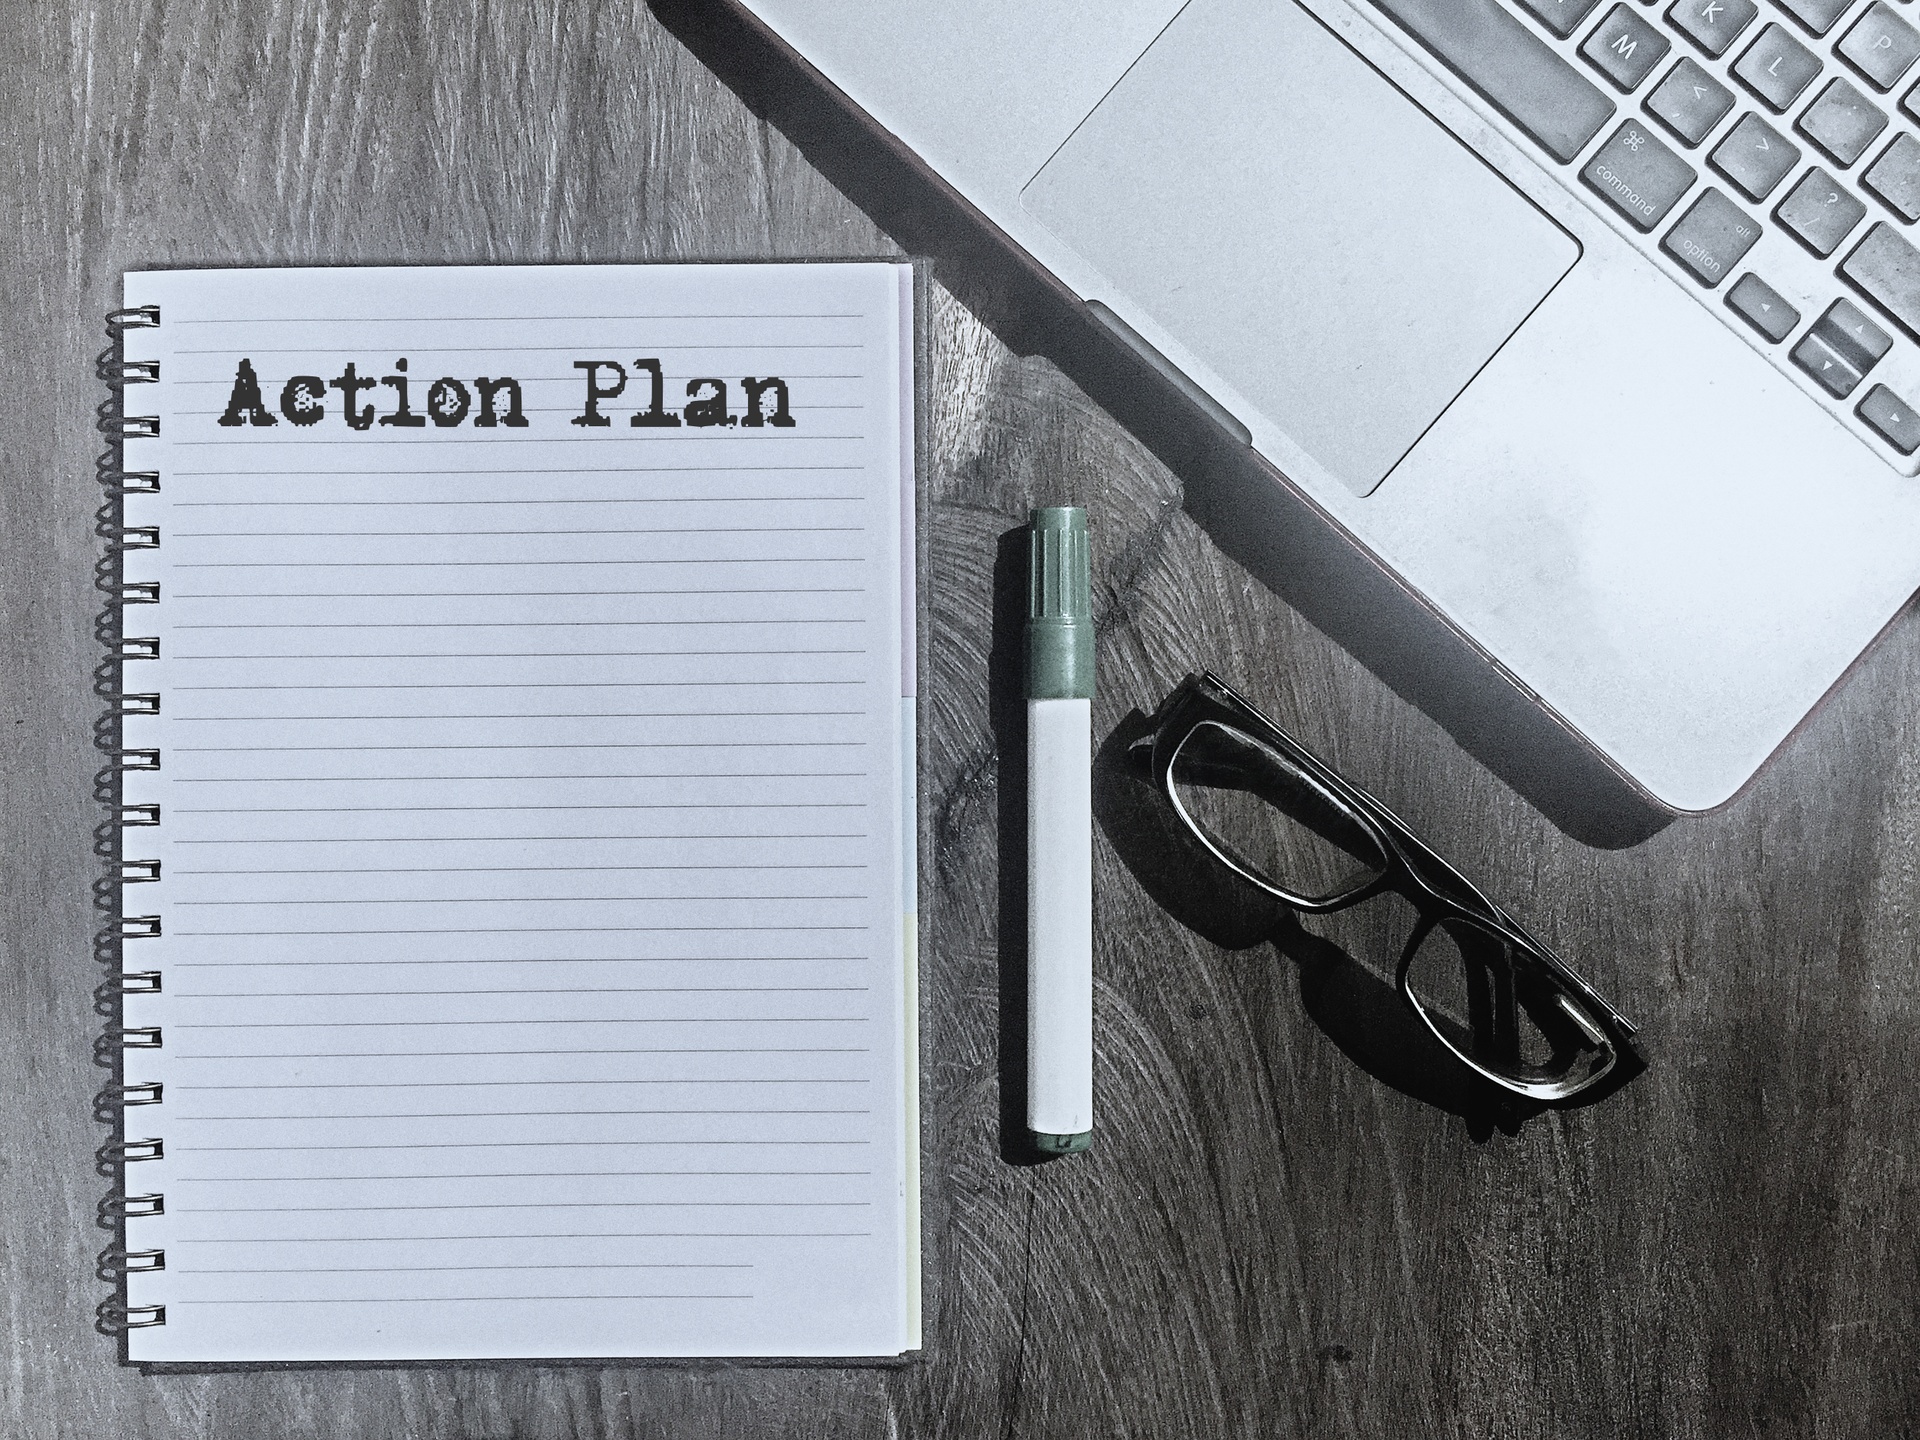 Forbes Travel Guide: Writing an Effective Action Plan